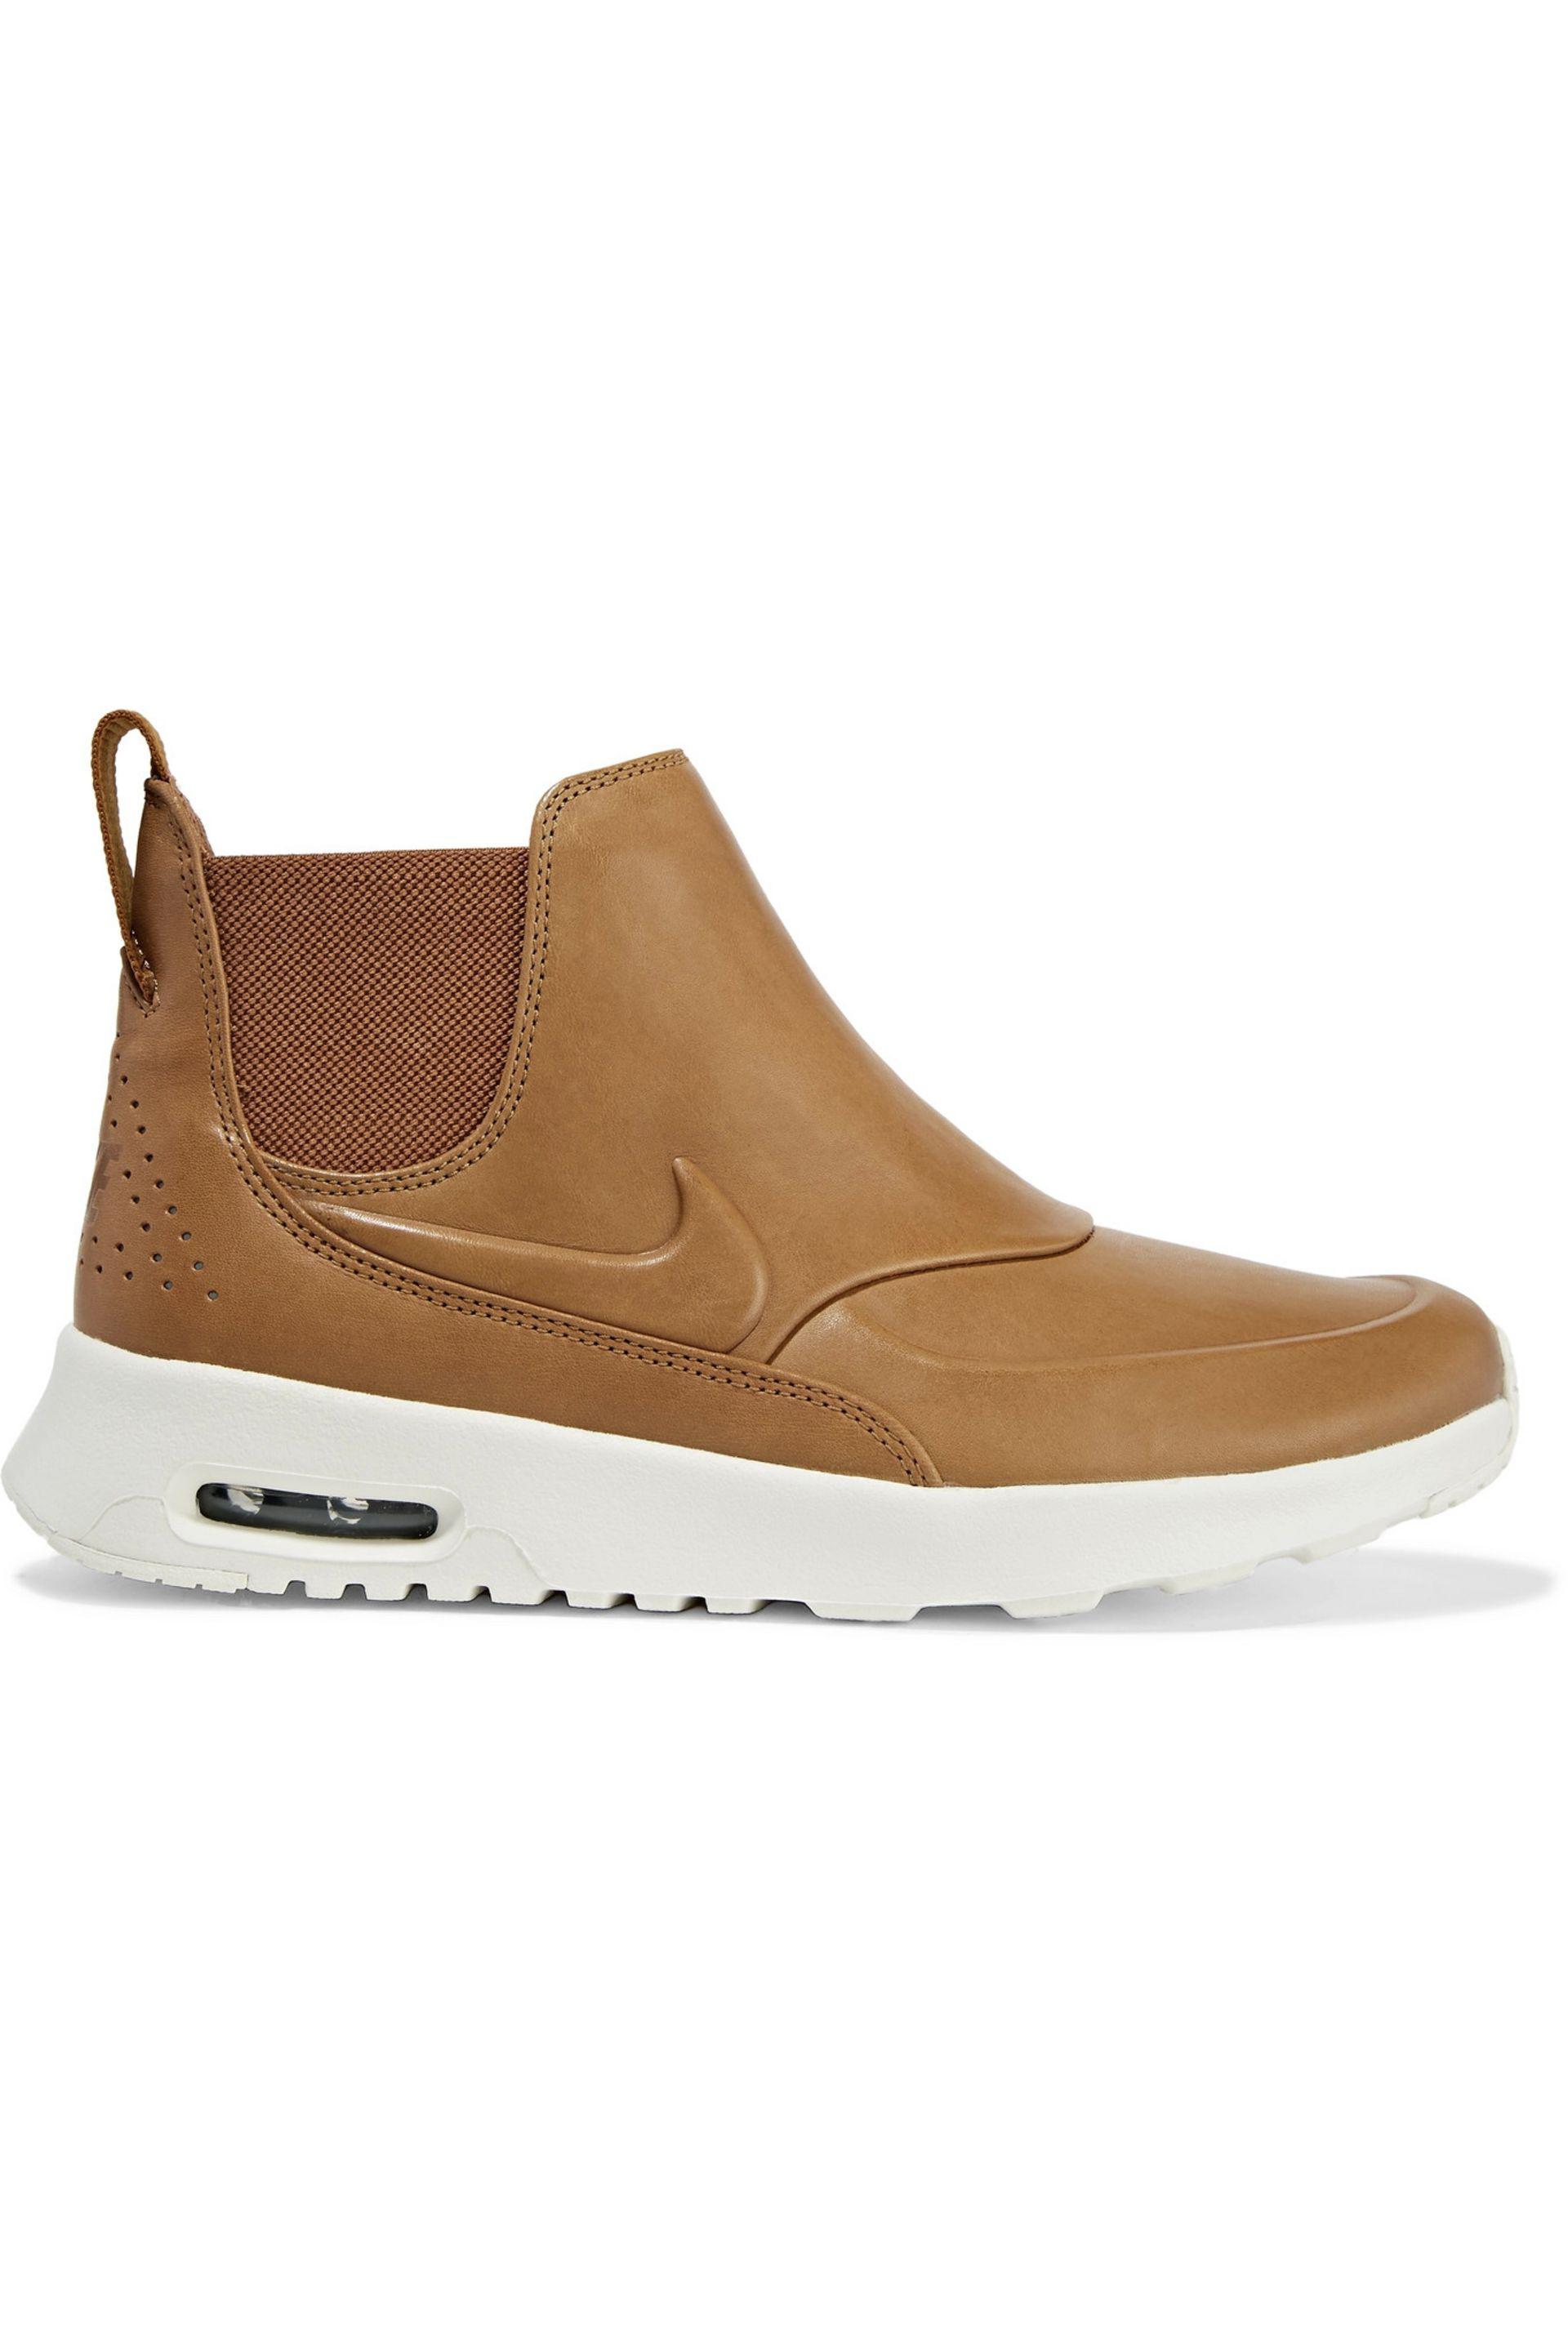 Nike Leather Air Max Thea Mid Wmns in Tan (Brown) | Lyst Canada